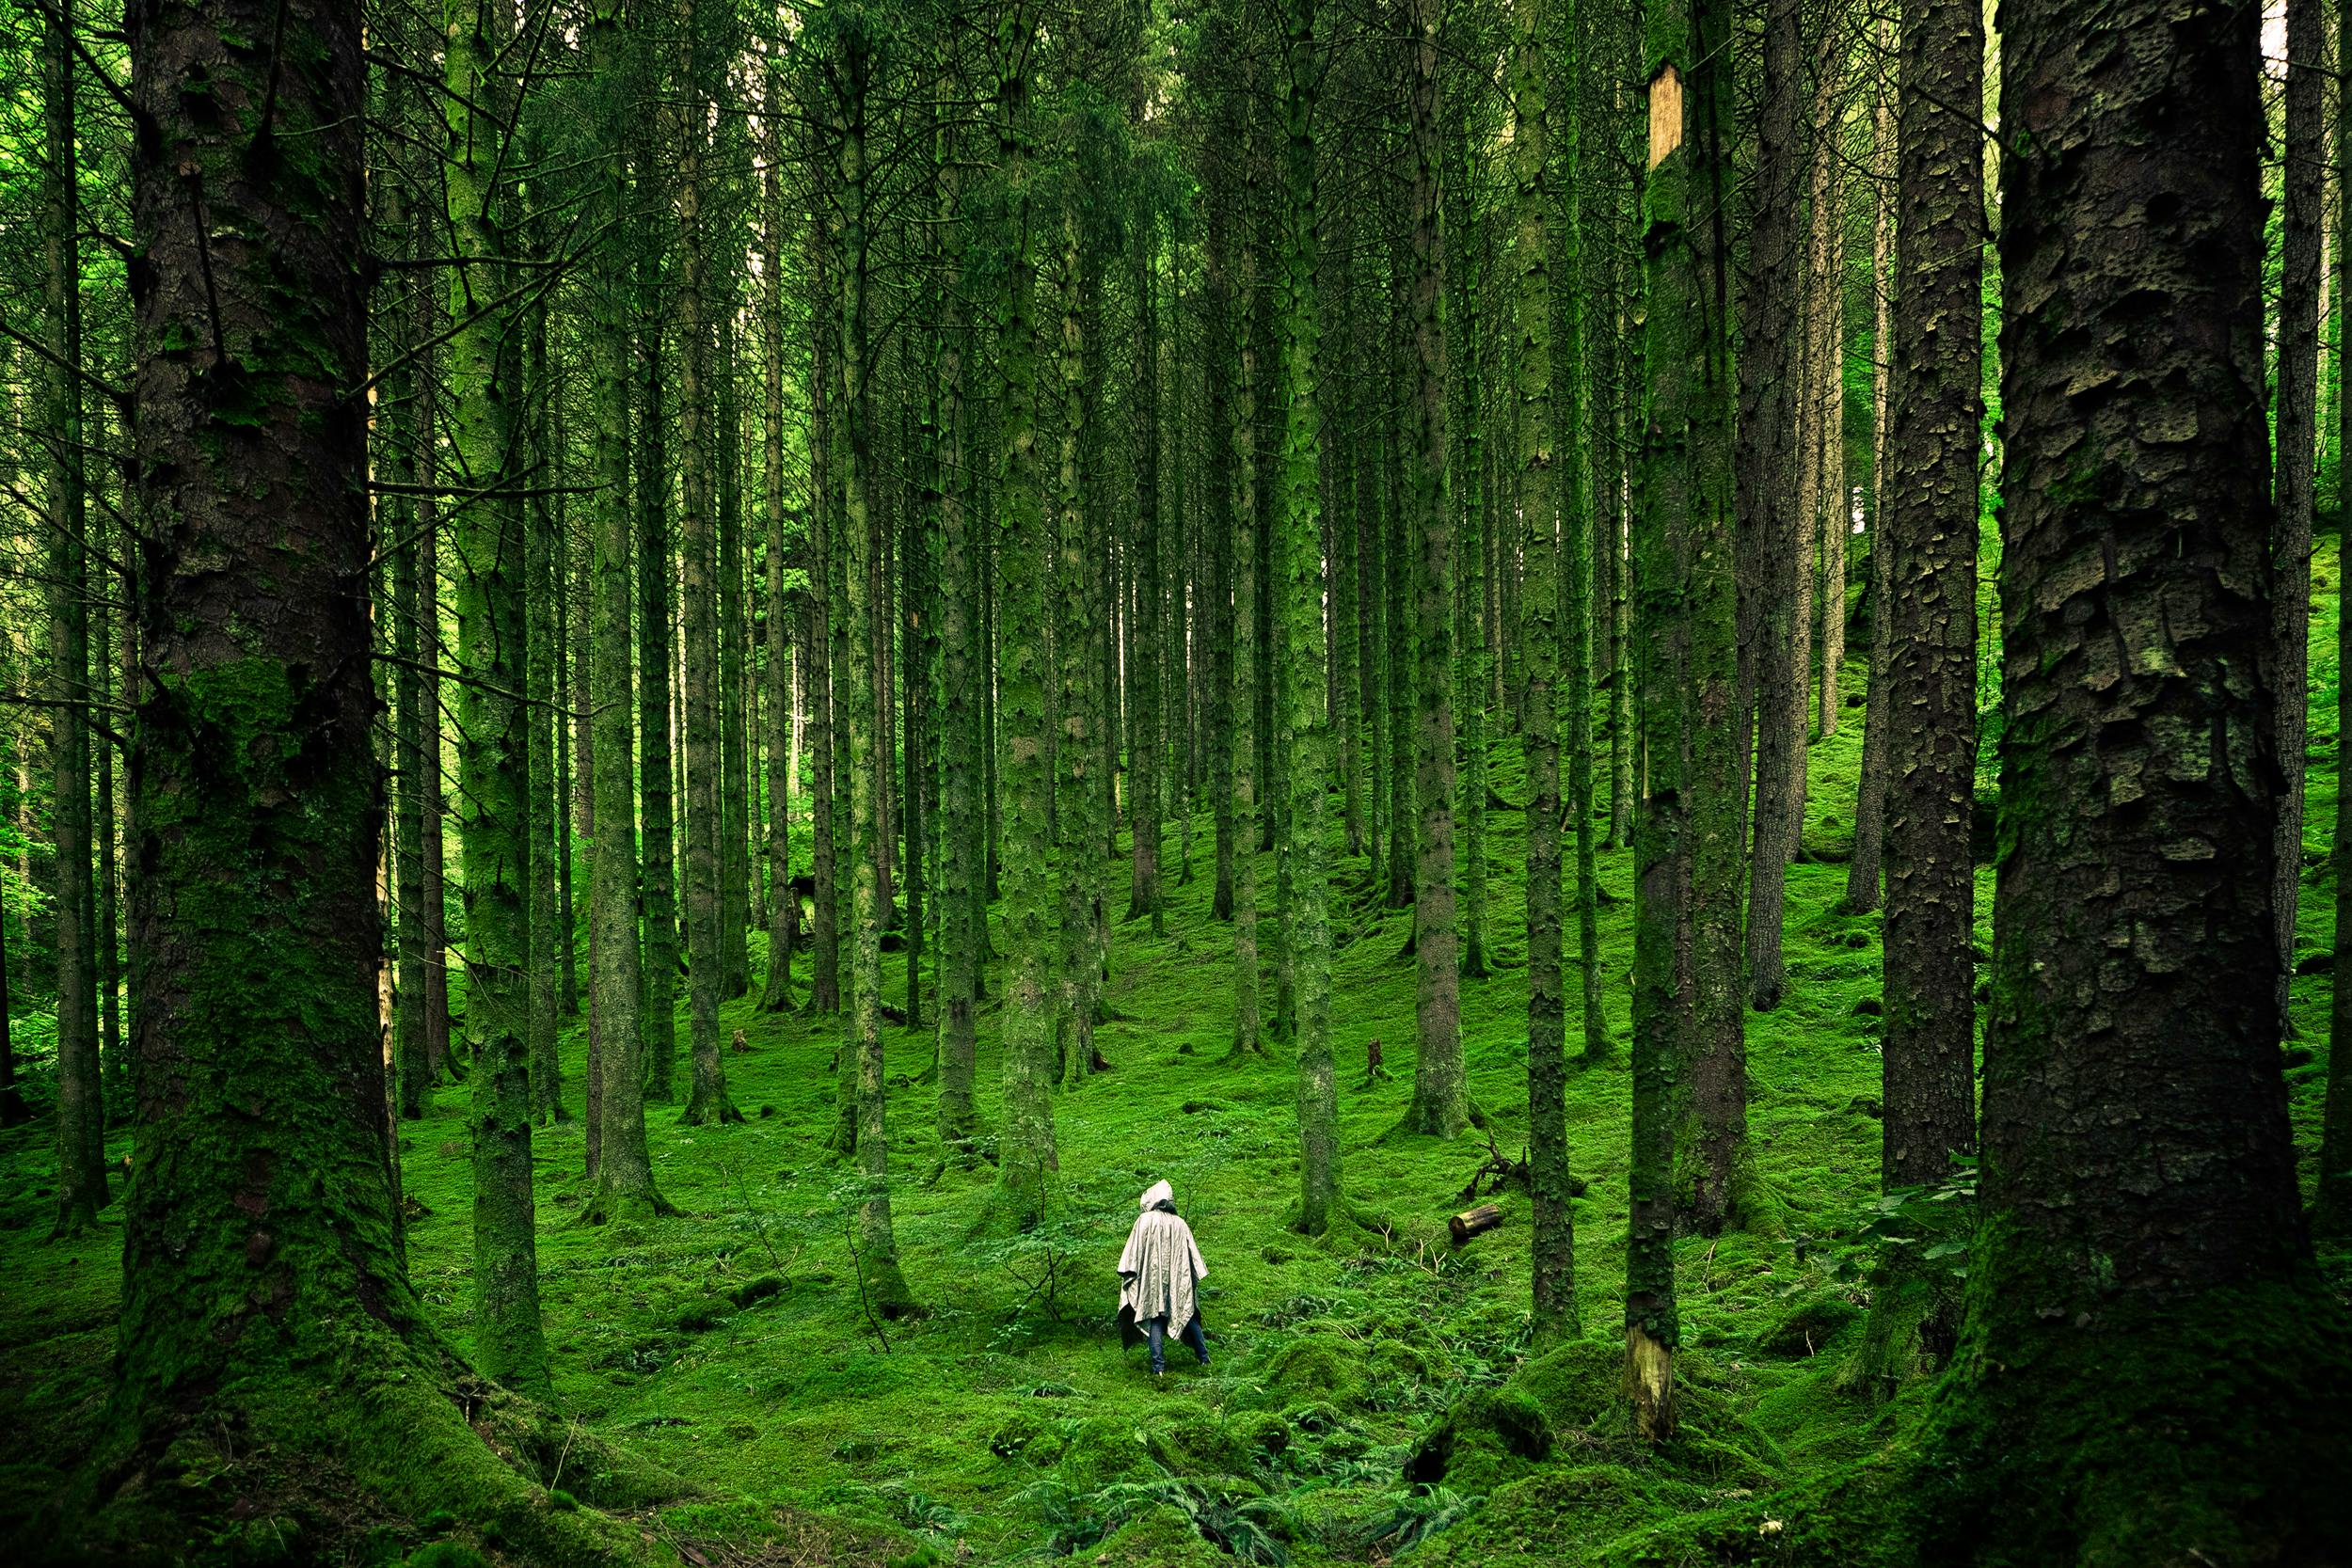 A deep green forest with a single figure in white in the center.